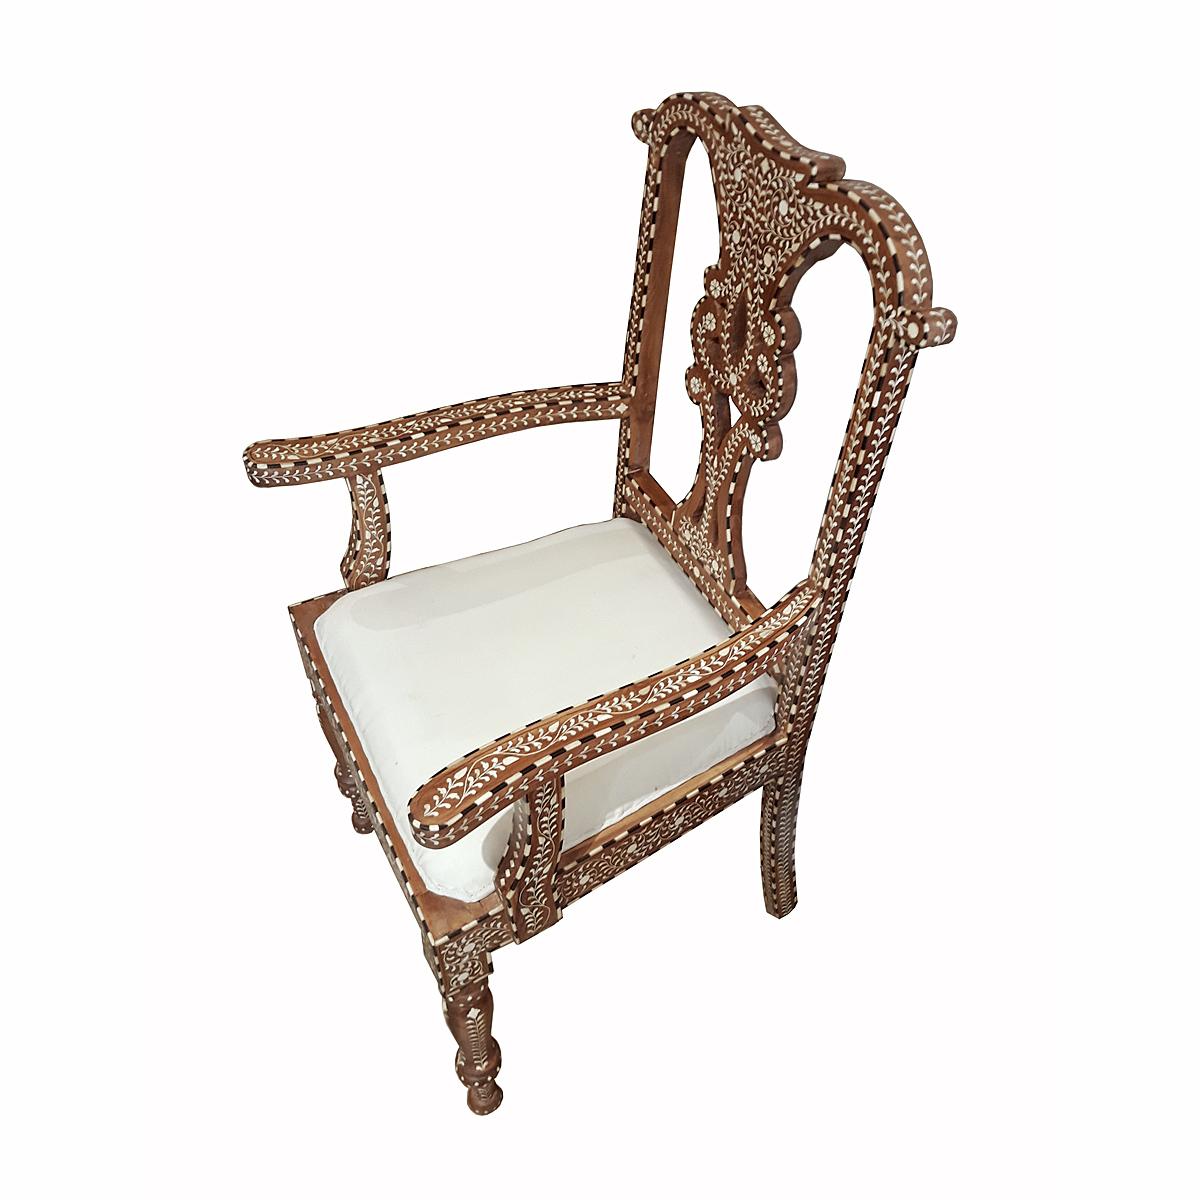 Bone-Inlaid Armchair from India 1